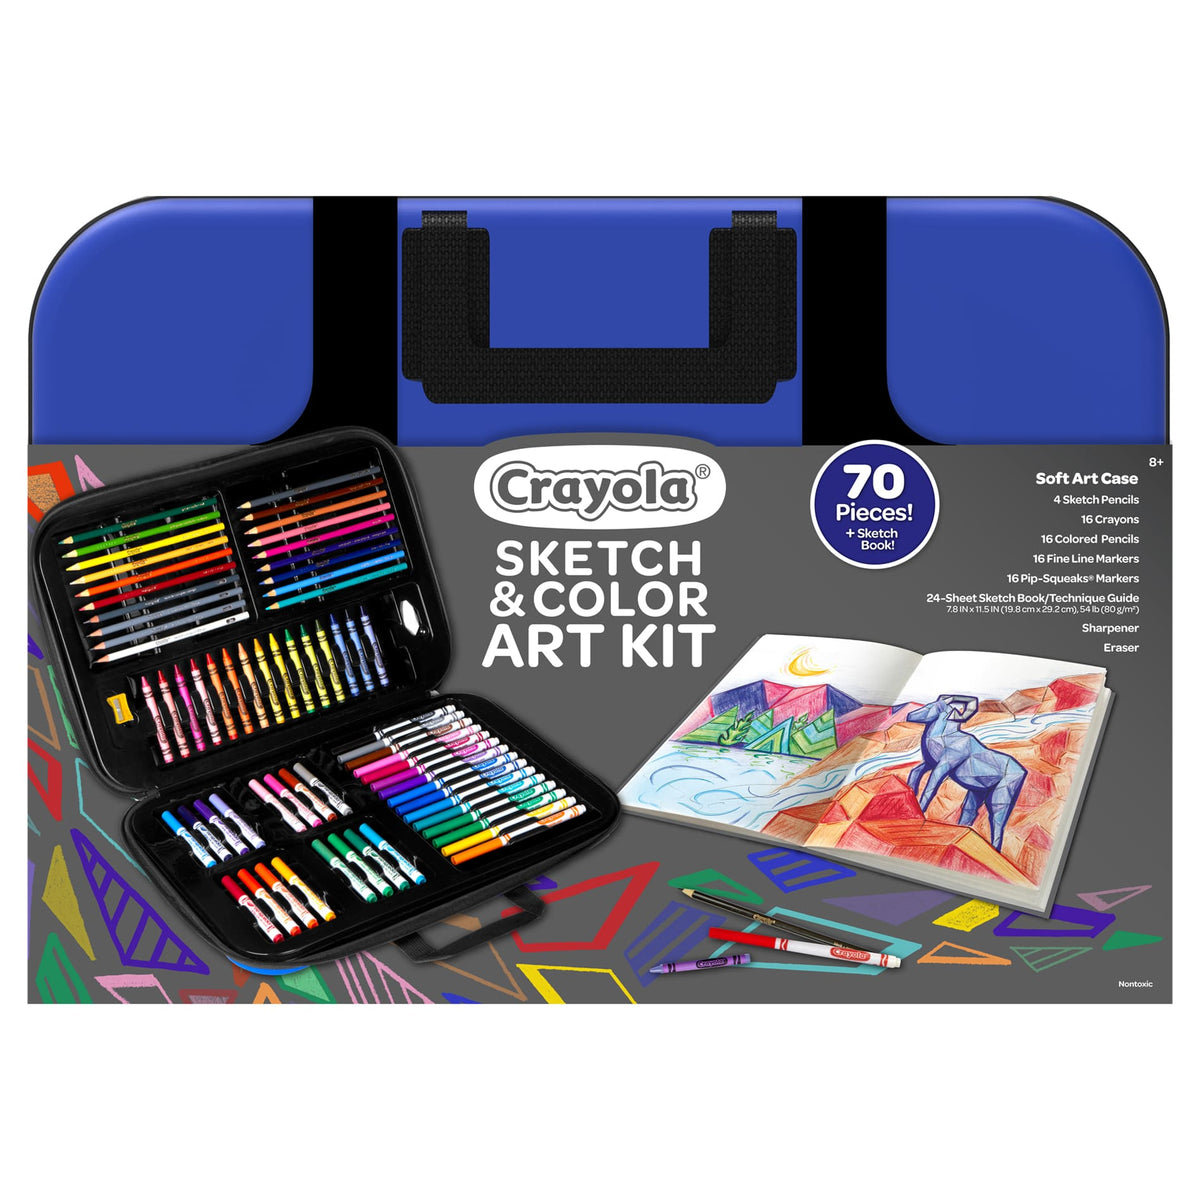 Crayola Sketch & Colour Art Kit with 70 Pieces, Sketch Book and Soft Carry Case